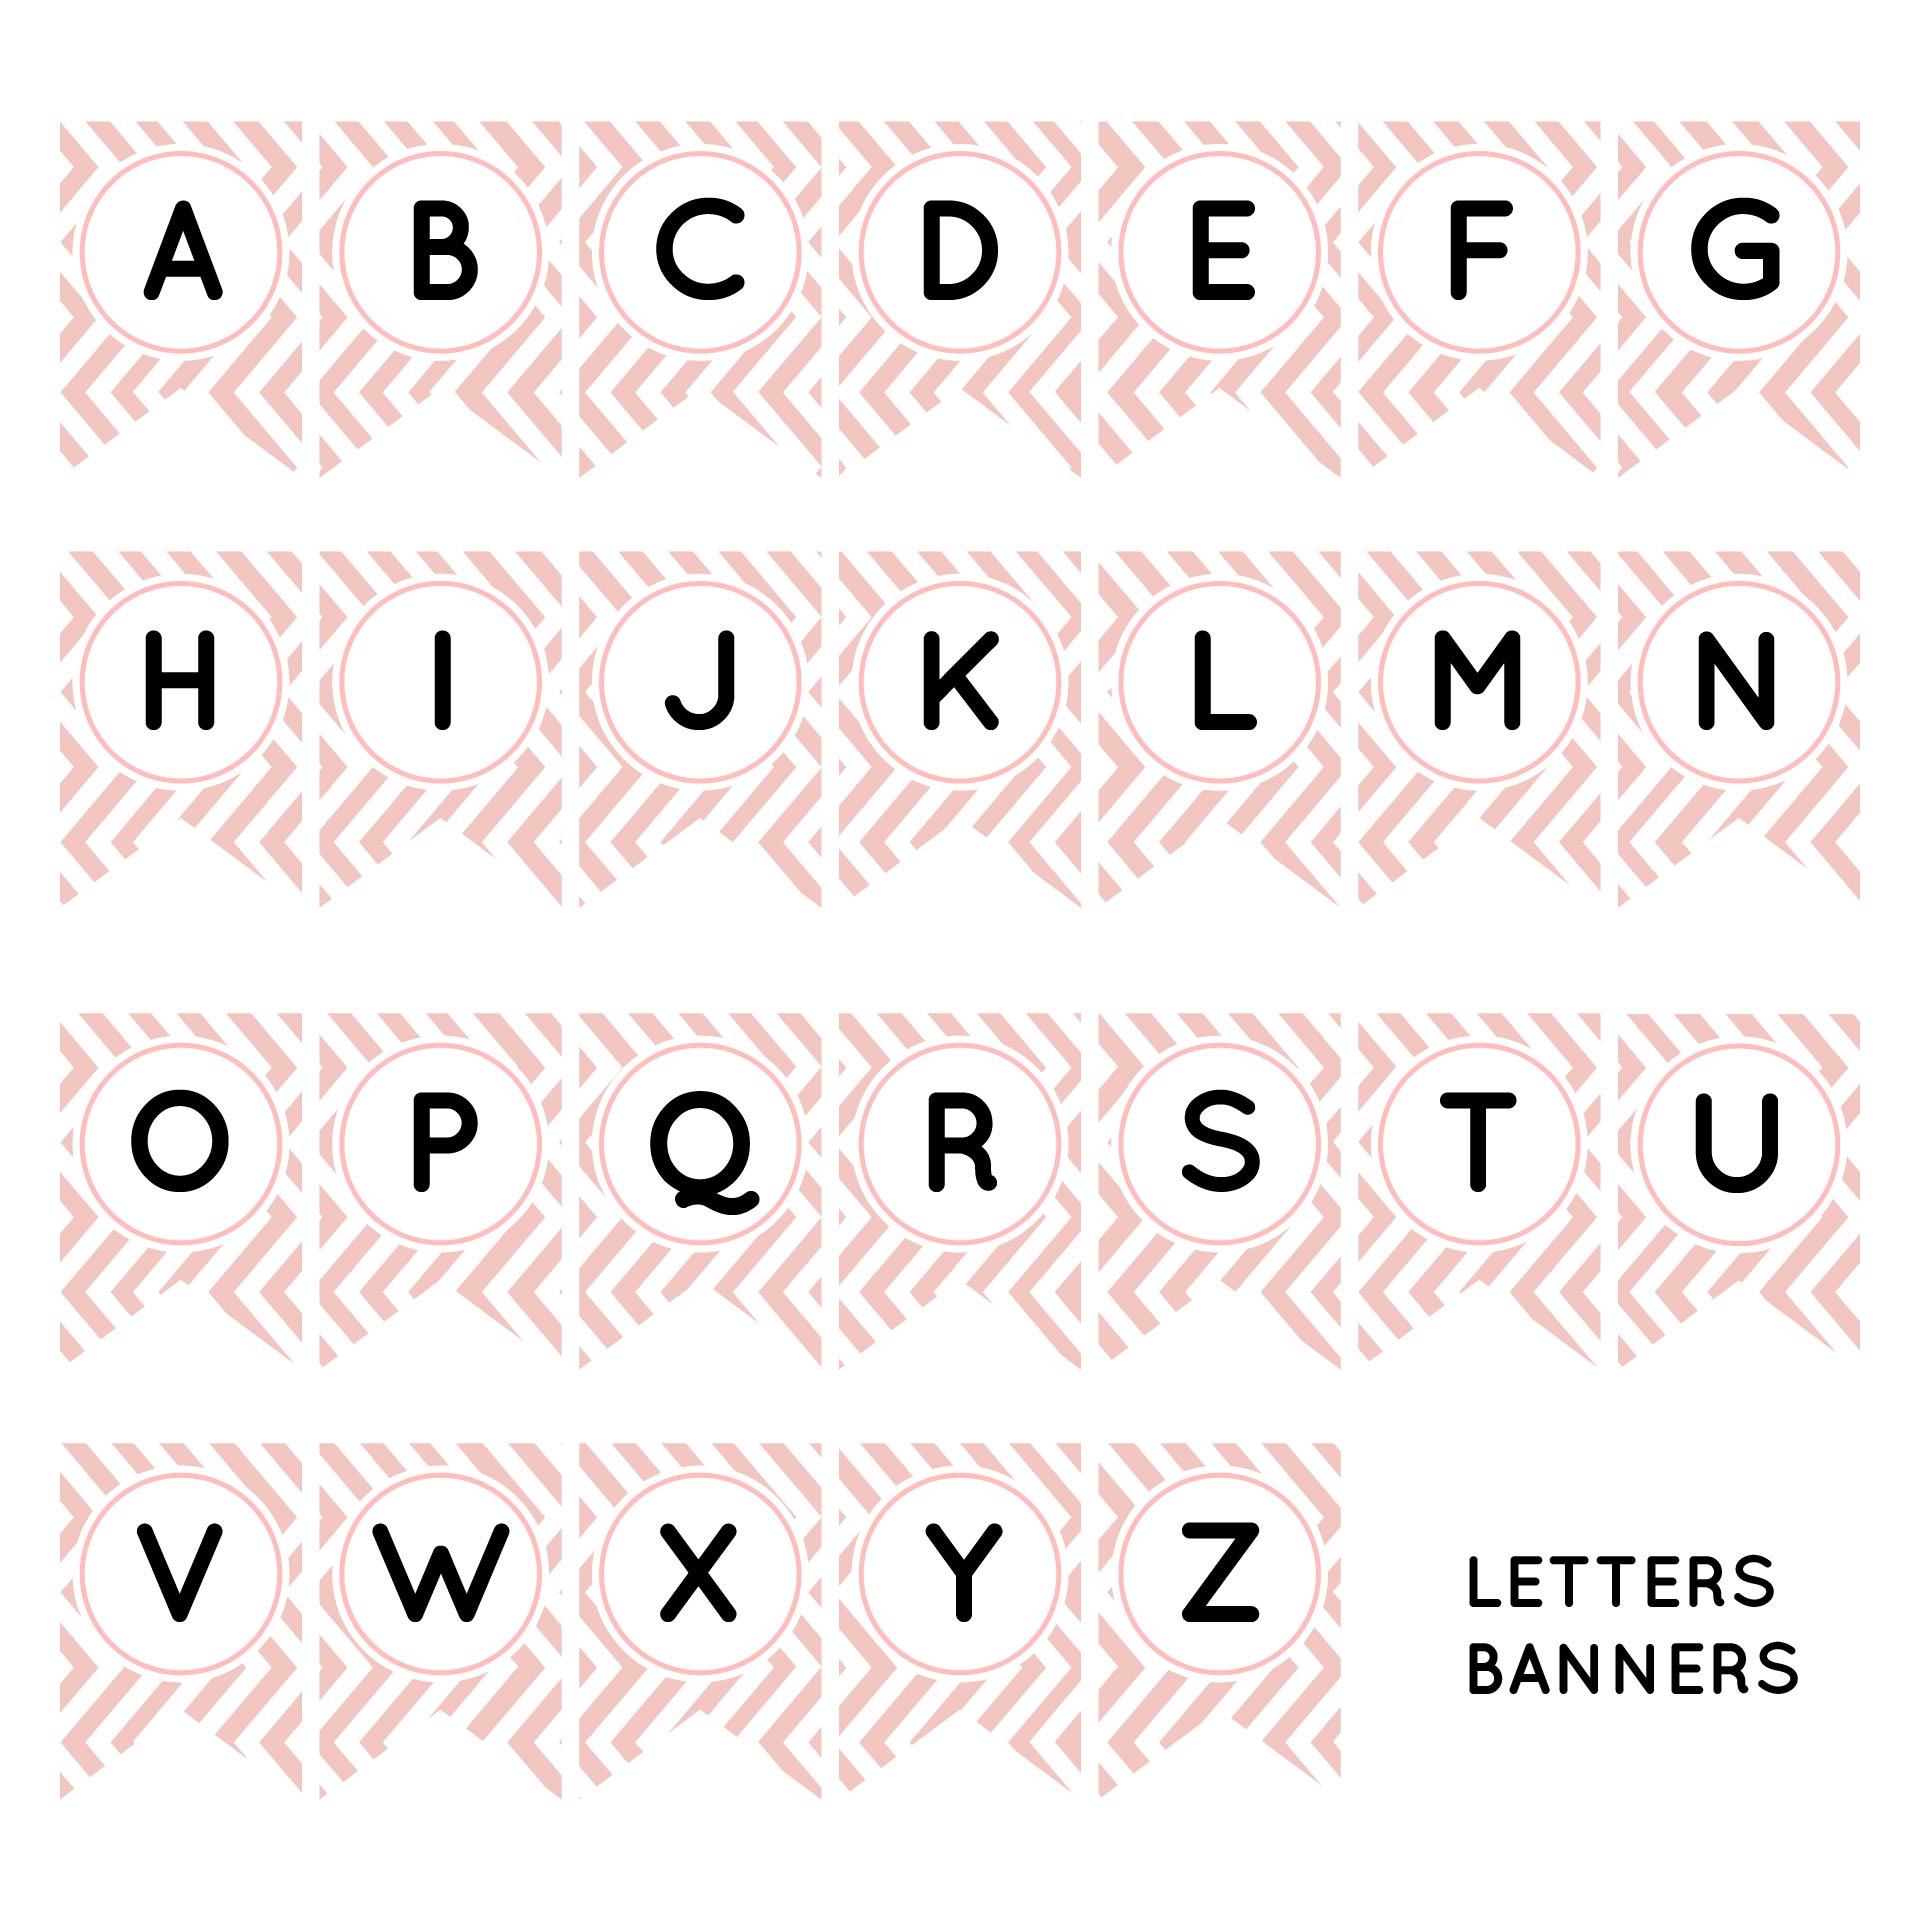 Printable Letters For Banners